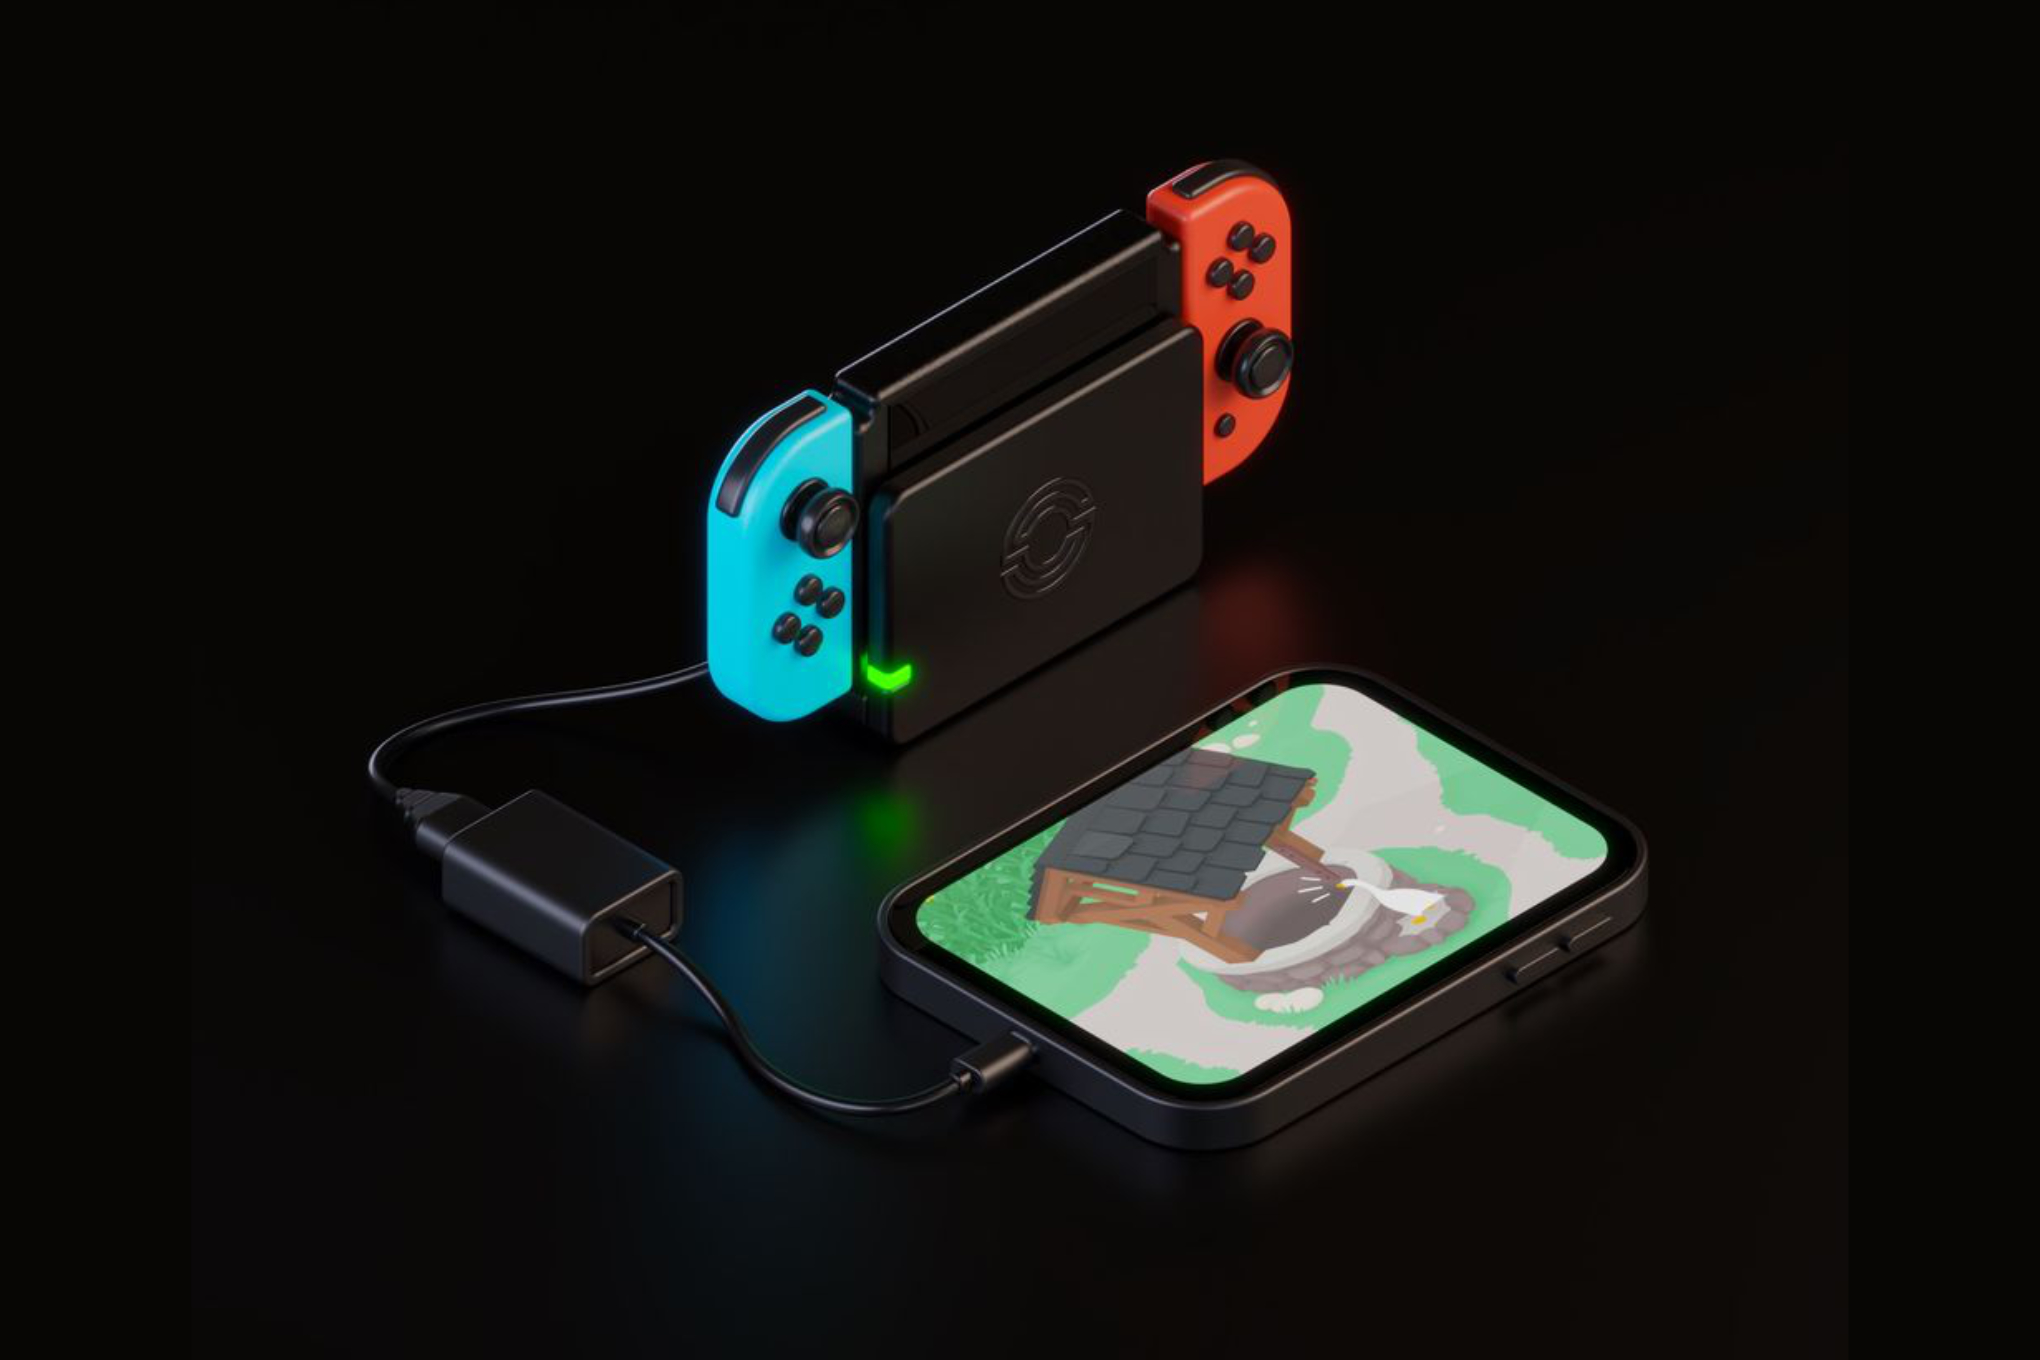 An image showing a fictionalized version of the Nintendo Switch and an iPad connected to each other.